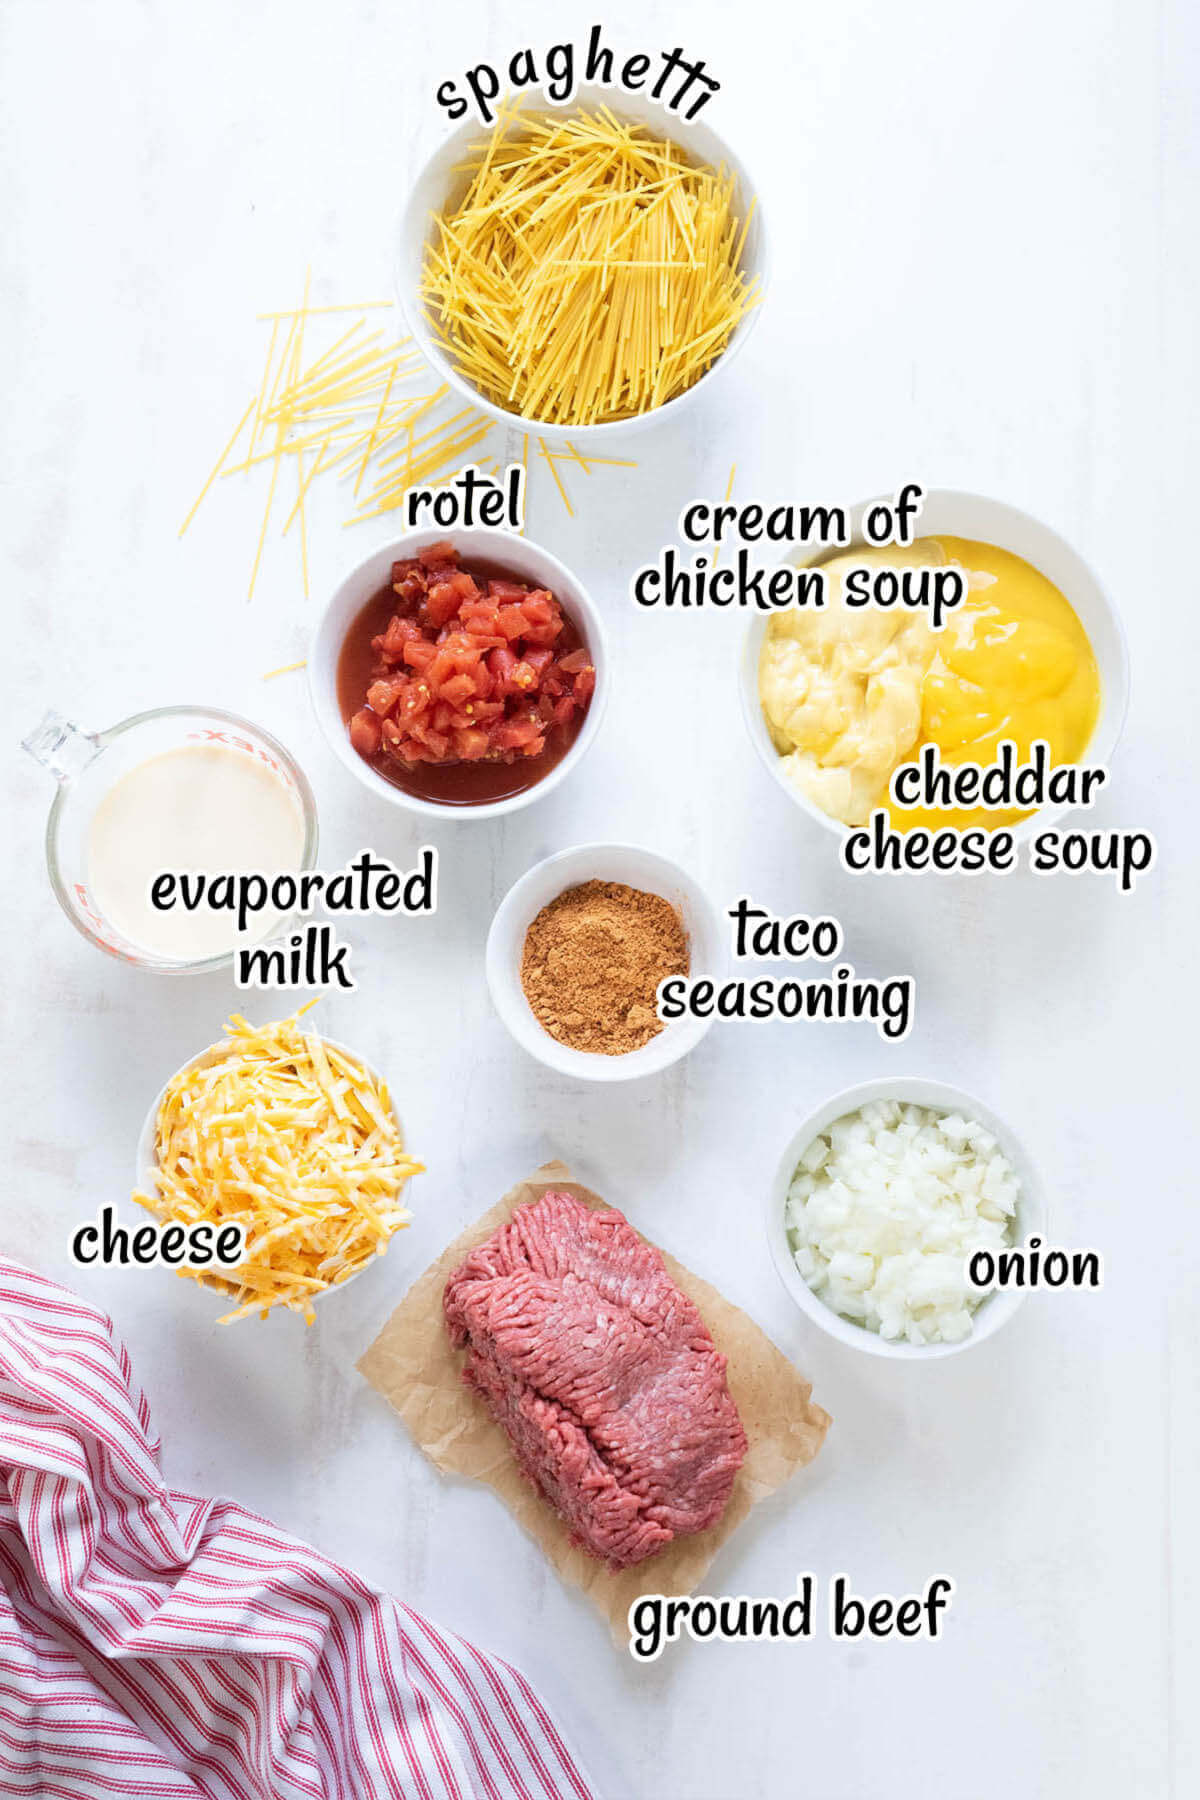 All of the ingredients needed to make the cheesy casserole recipe. With print overlay for clarification. 